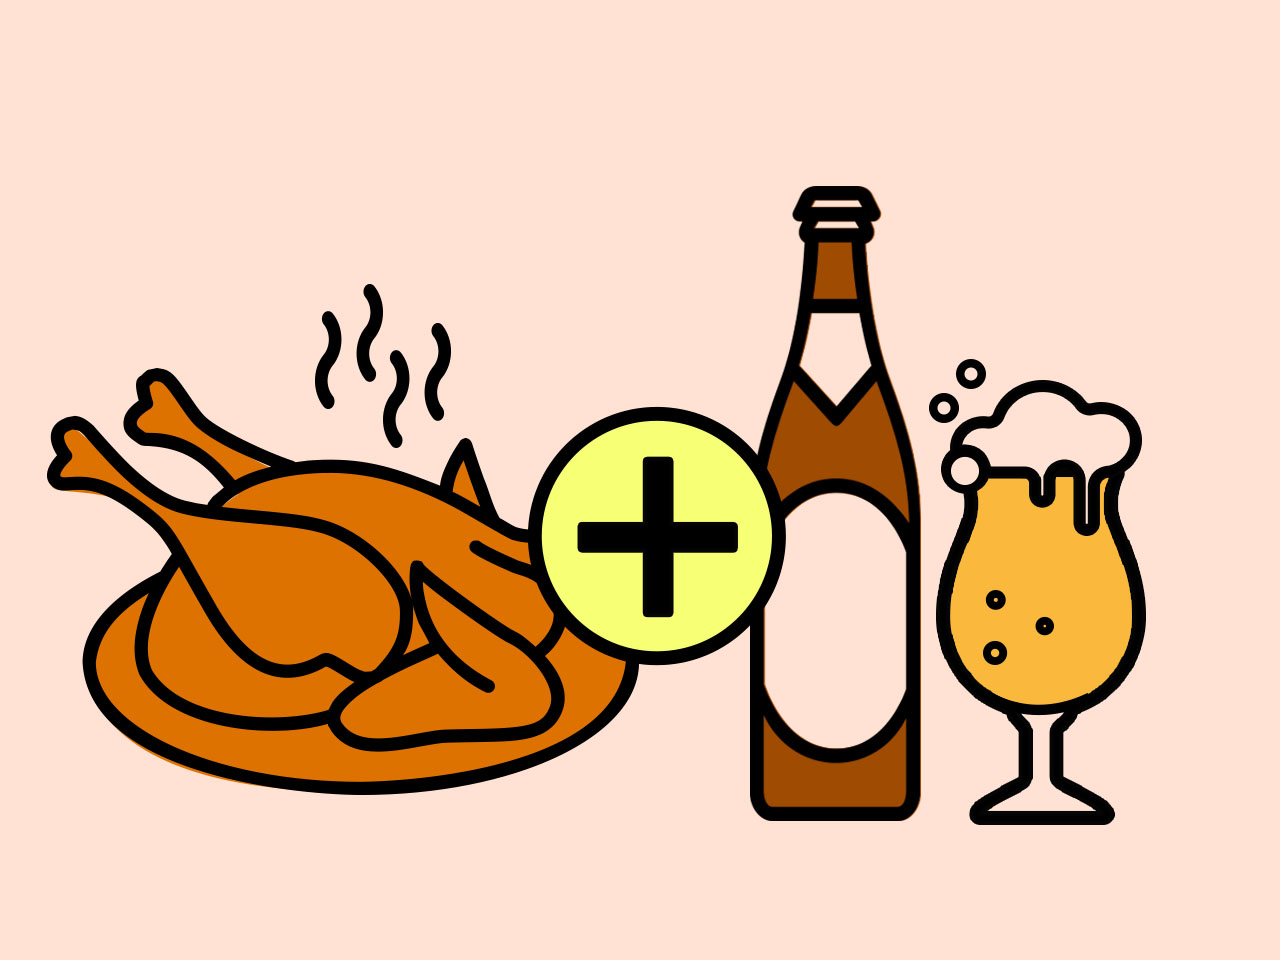 Illustration of a turkey with a plus sign a beer bottle and overflowing glass on a pink bakcground